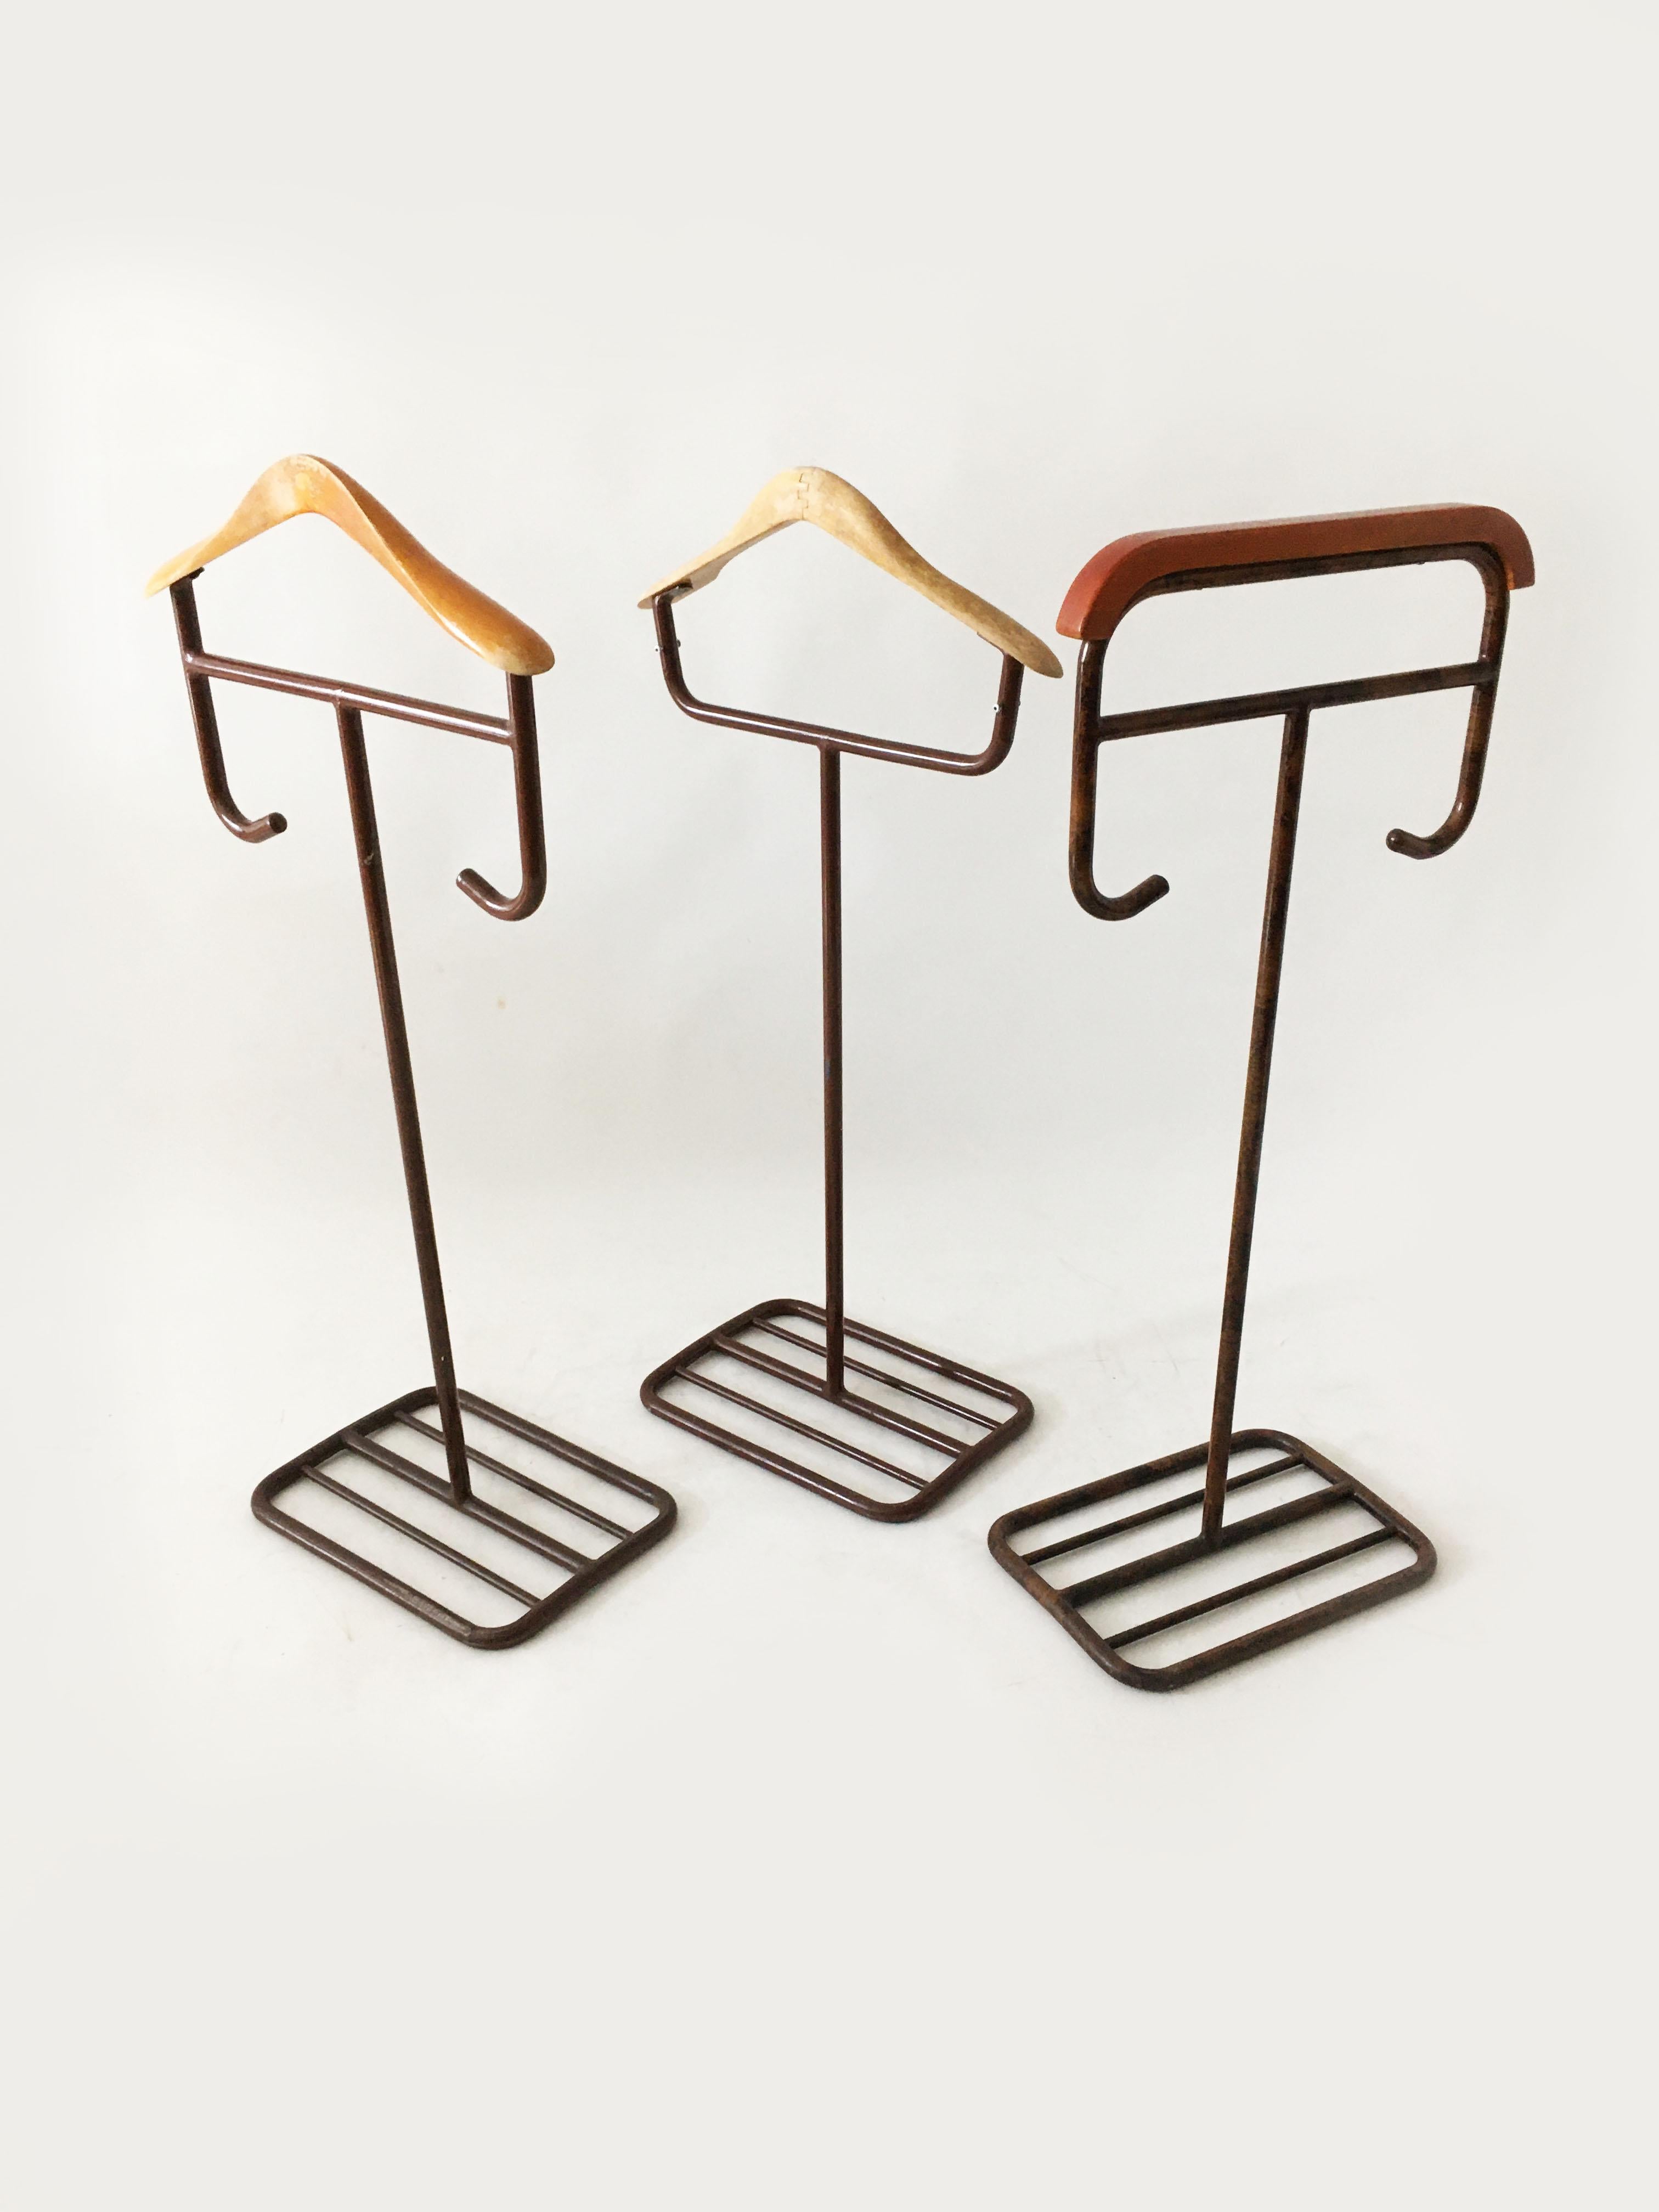 Metal Bauhaus Valet Stand Group of Three Model No. I, II, III, Germany 1930s For Sale